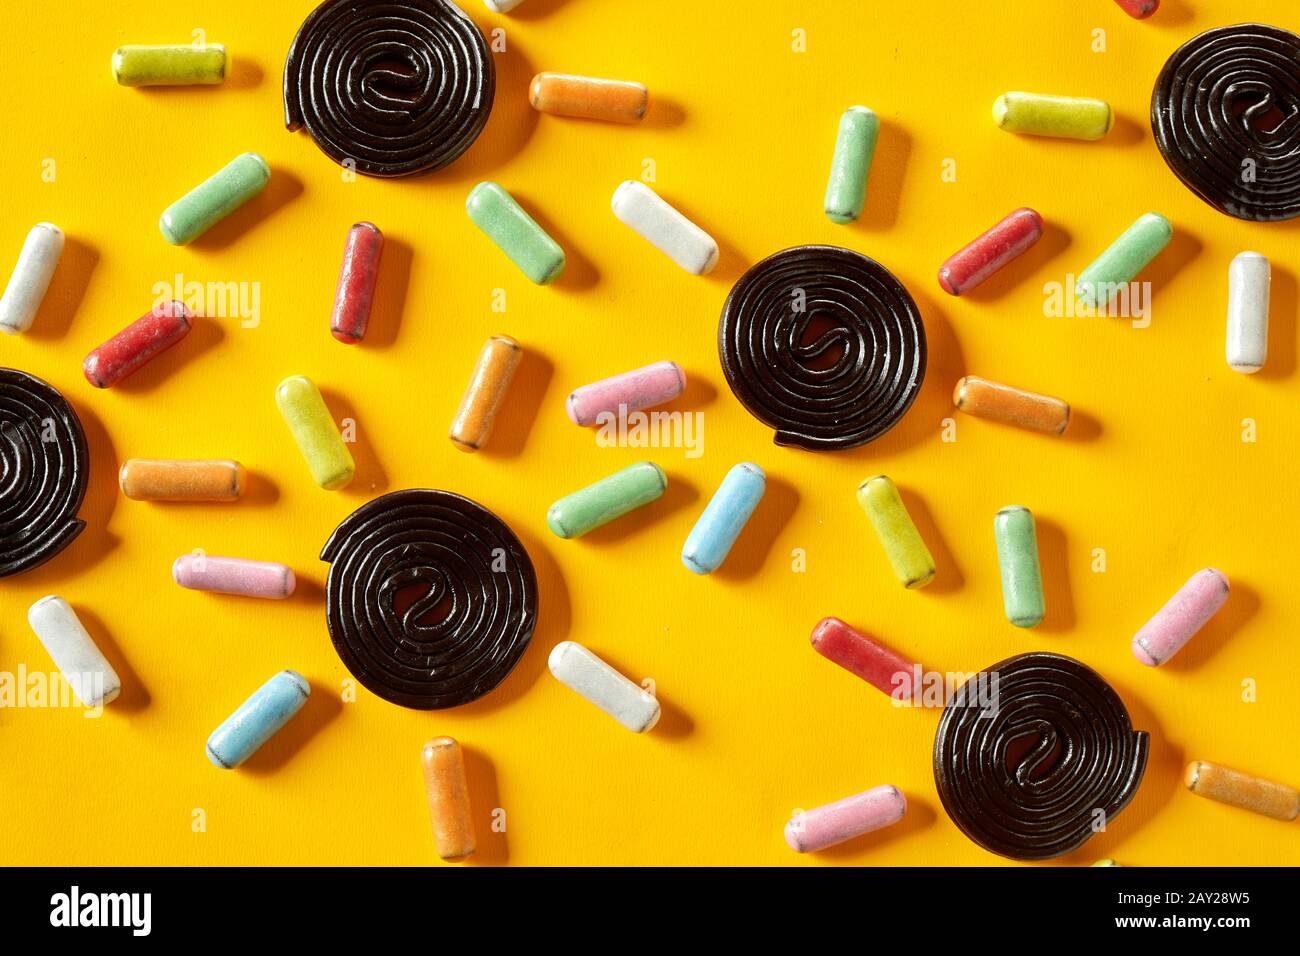 Background pattern of candy suns with spiral coiled liquorice centres and sugar-coated colorful rays on a tropical yellow background Stock Photo